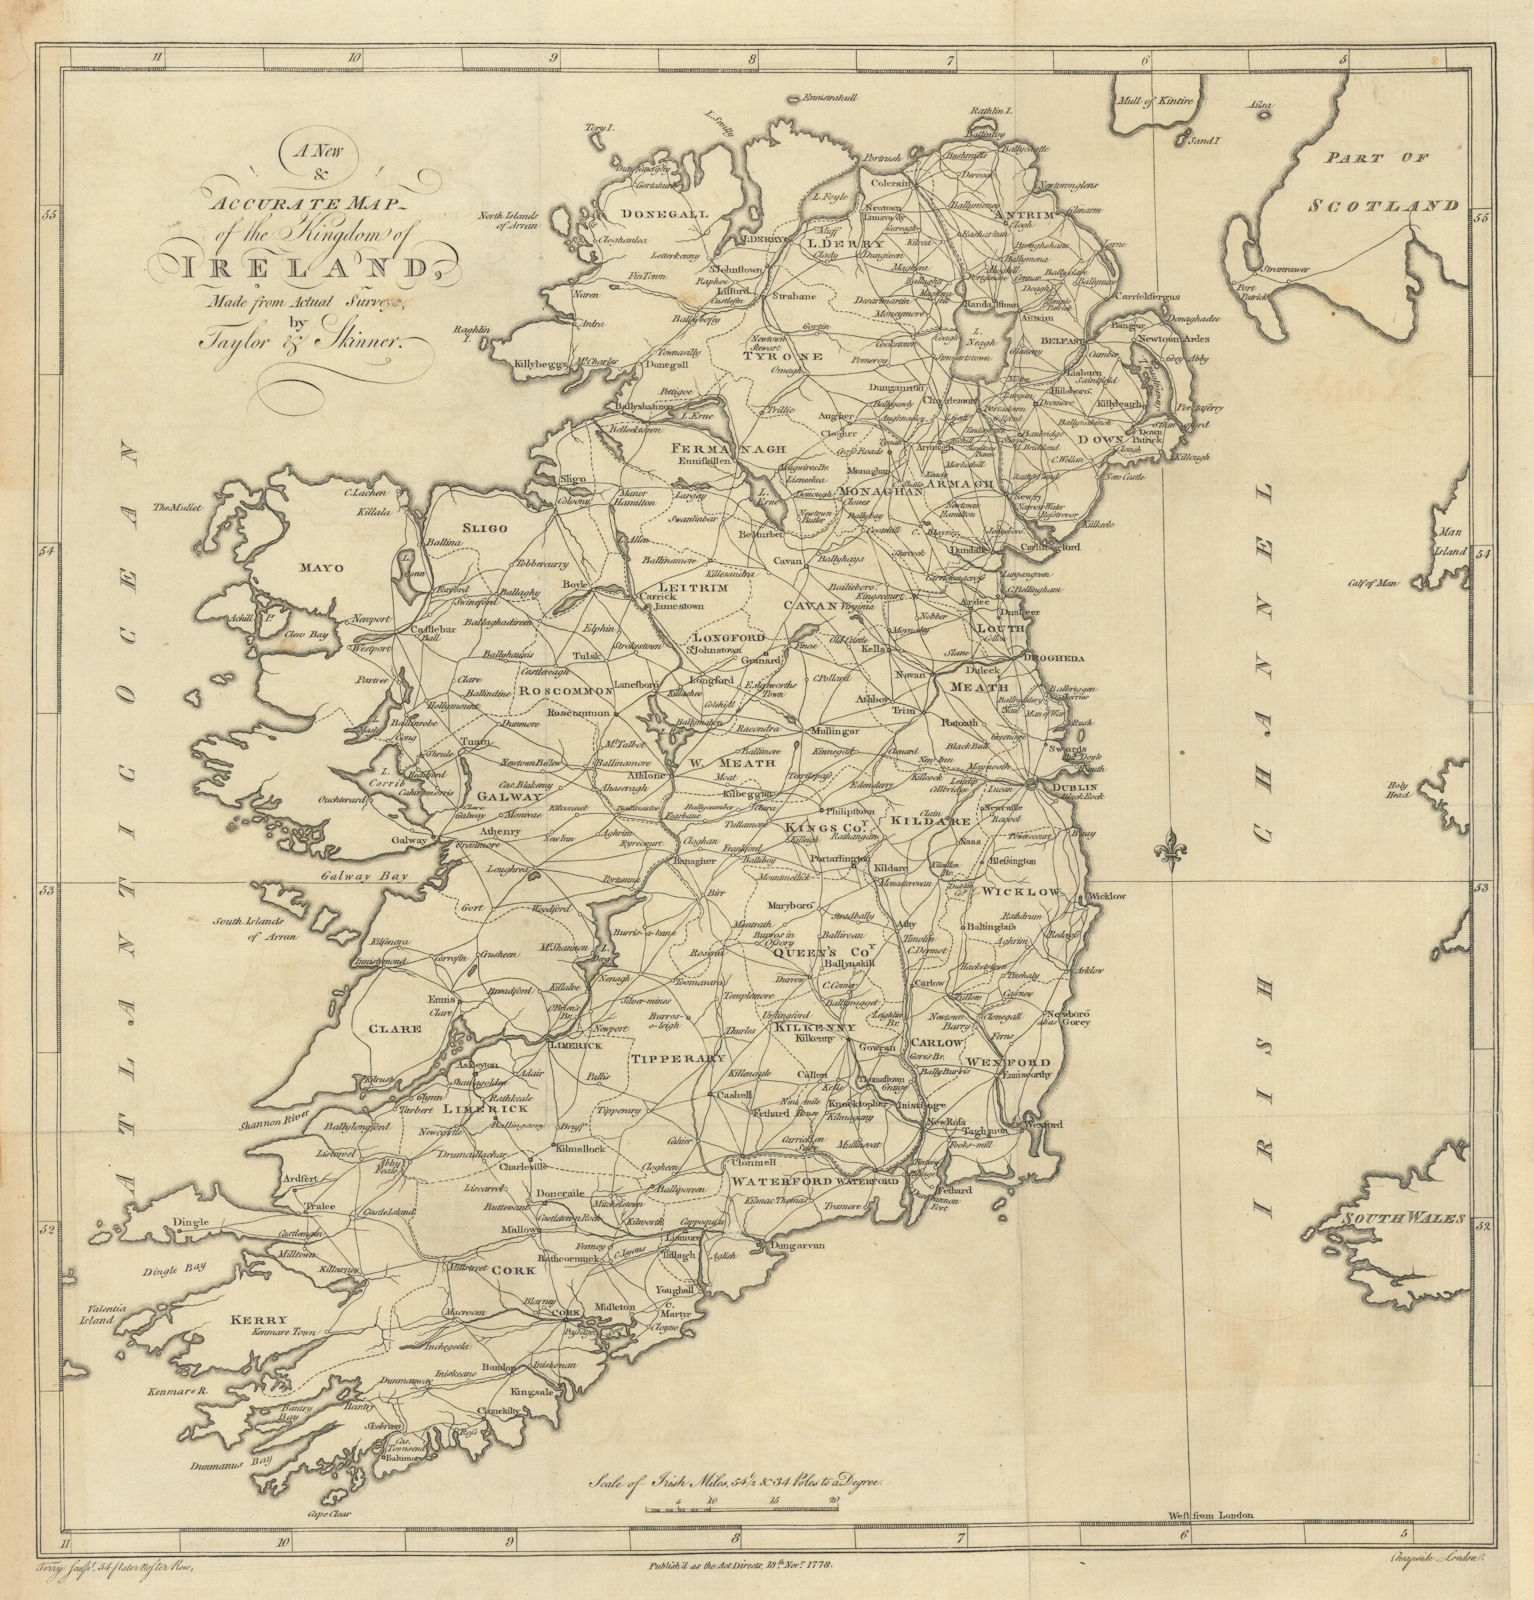 Associate Product A New & Accurate Map of the Kingdom of Ireland, by Taylor & Skinner 1778